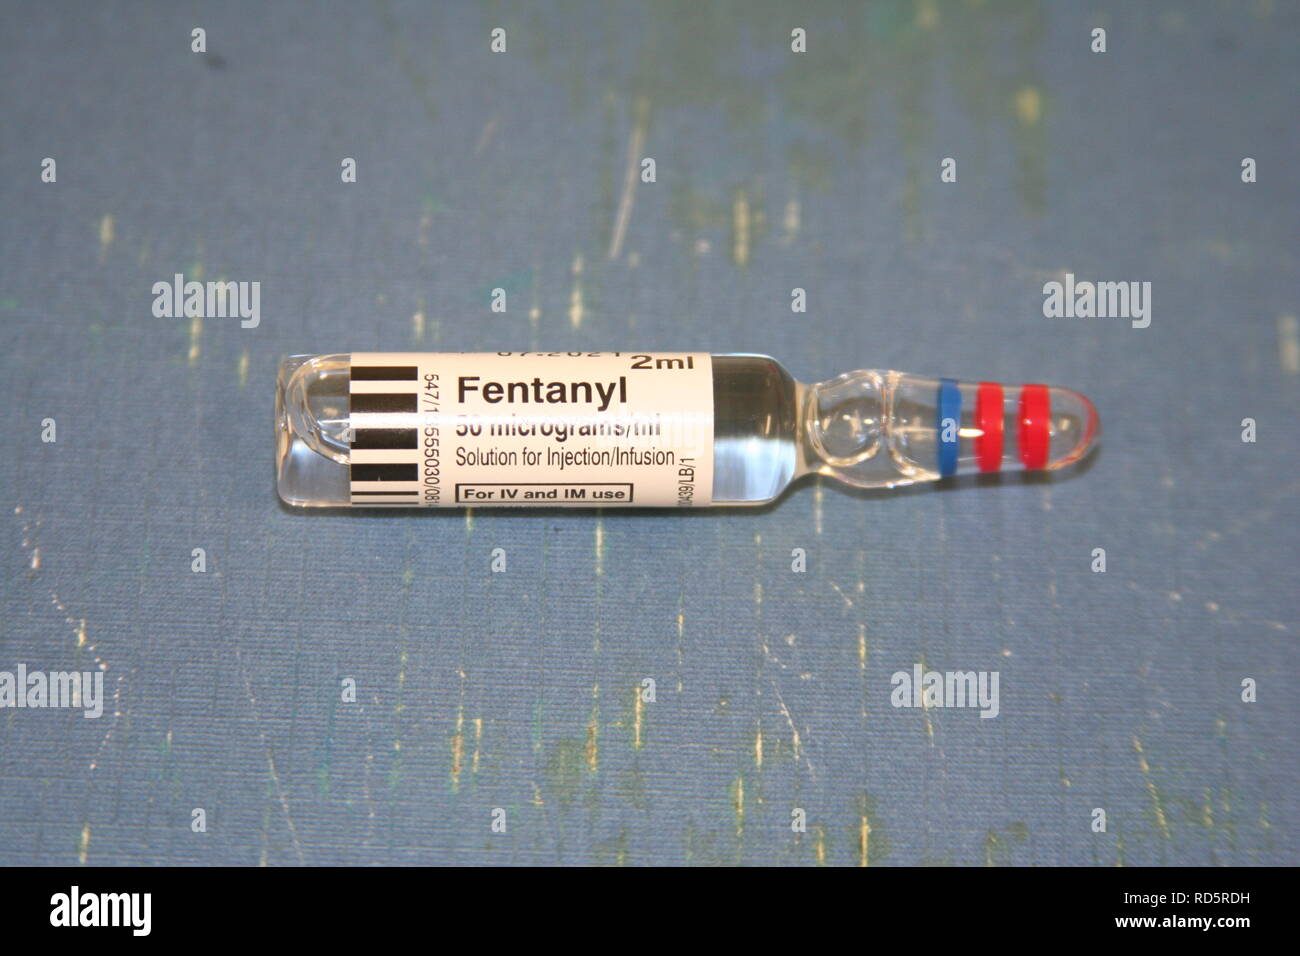 Fentanyl Citrate injection, 50 micrograms per ml in a 2ml ampoule Stock Photo